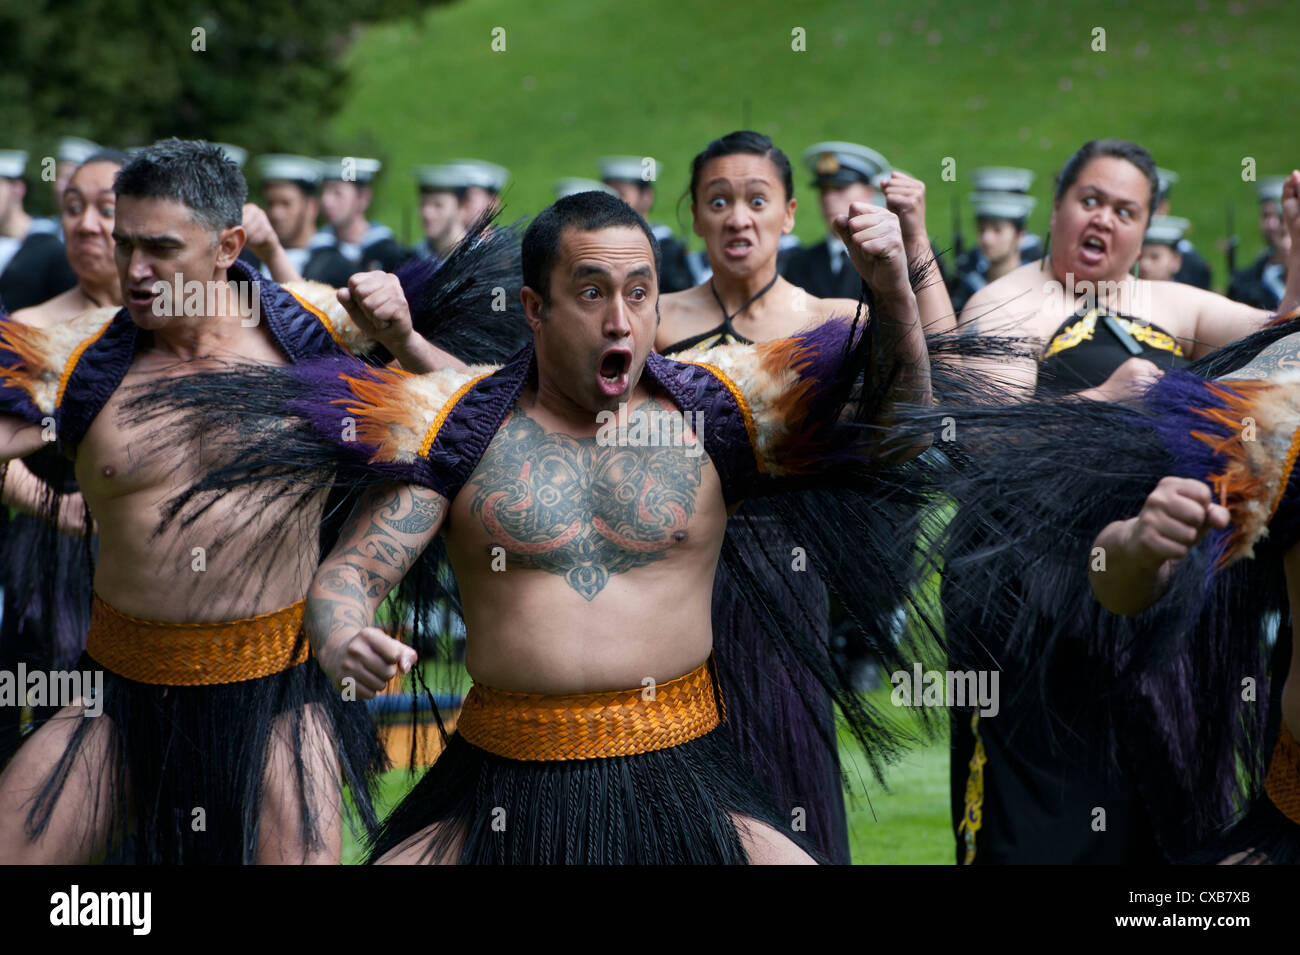 Maori warriors preform a Haka, dance of welcome for Secretary of Defense Leon Panetta during a Powhiri ceremony September 21, 2012 in Auckland, New Zealand. The ceremony is an ancient Maori tradition used to determine if visitors came in peace or with hostile intent. Stock Photo